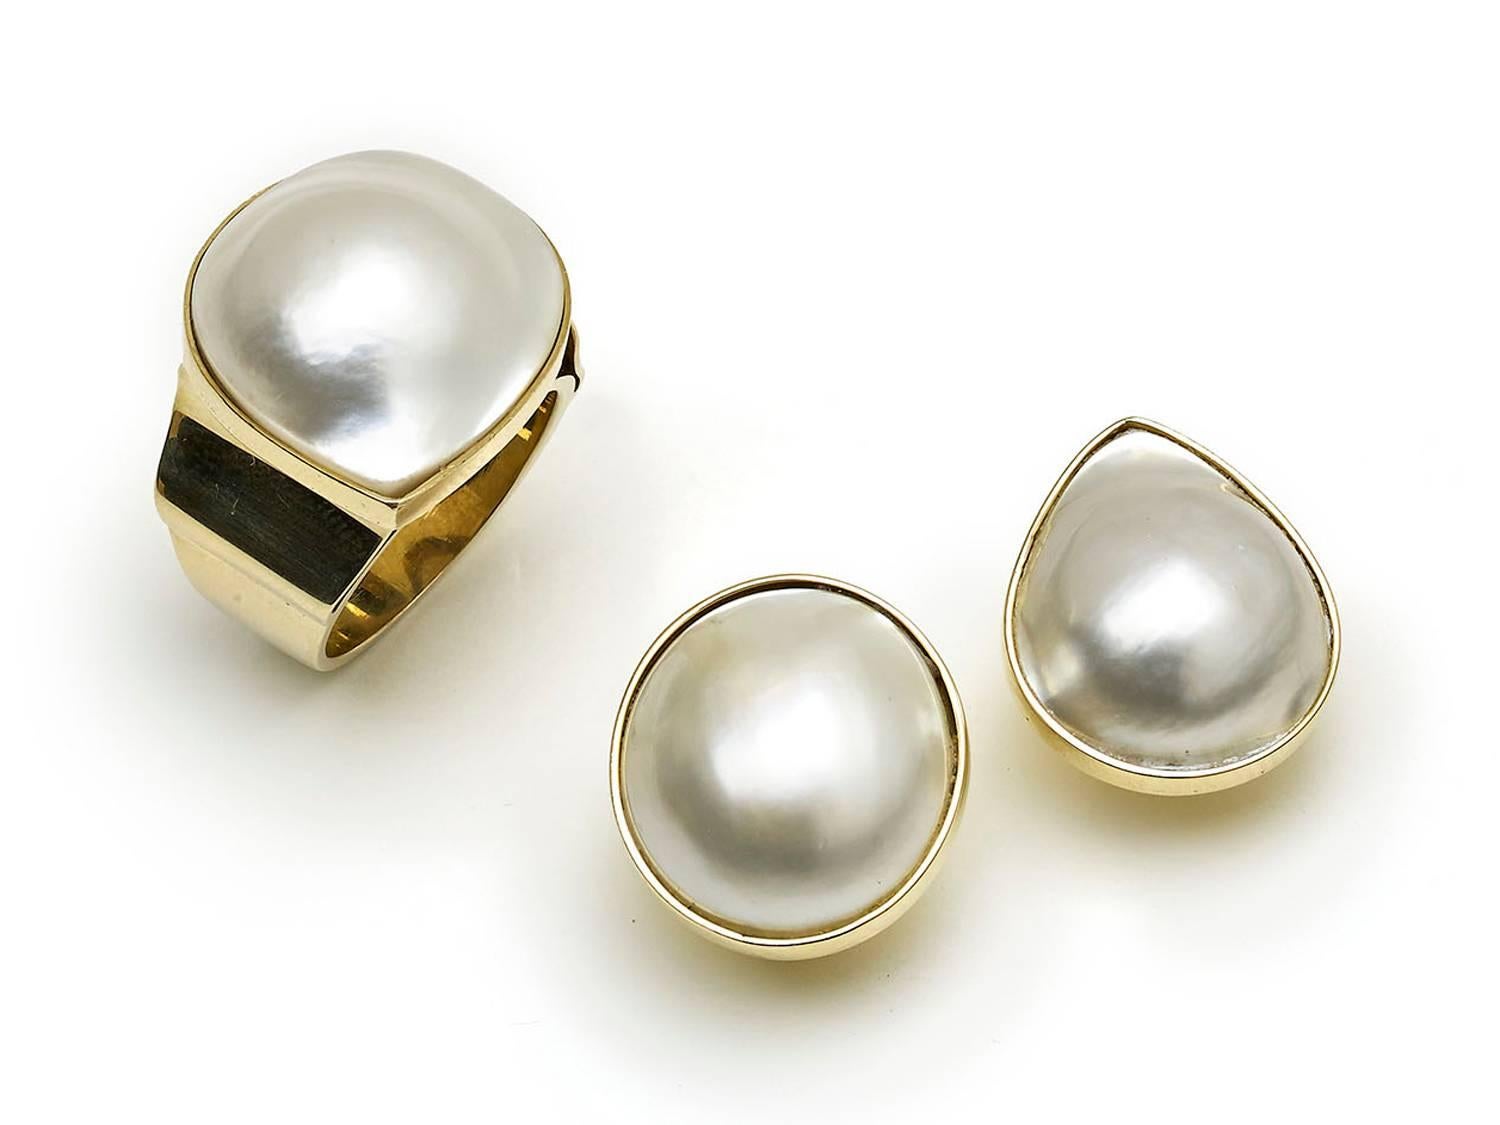 A mabé pearl and gold earrings and ring suite, with a ring, set with a pear shape mabé pearl, in a rub over setting, on a wide, tapering, shank, mounted in 14ct gold, stamped 14K and a pair of earrings, set with one oval and one round mabé pearl, in